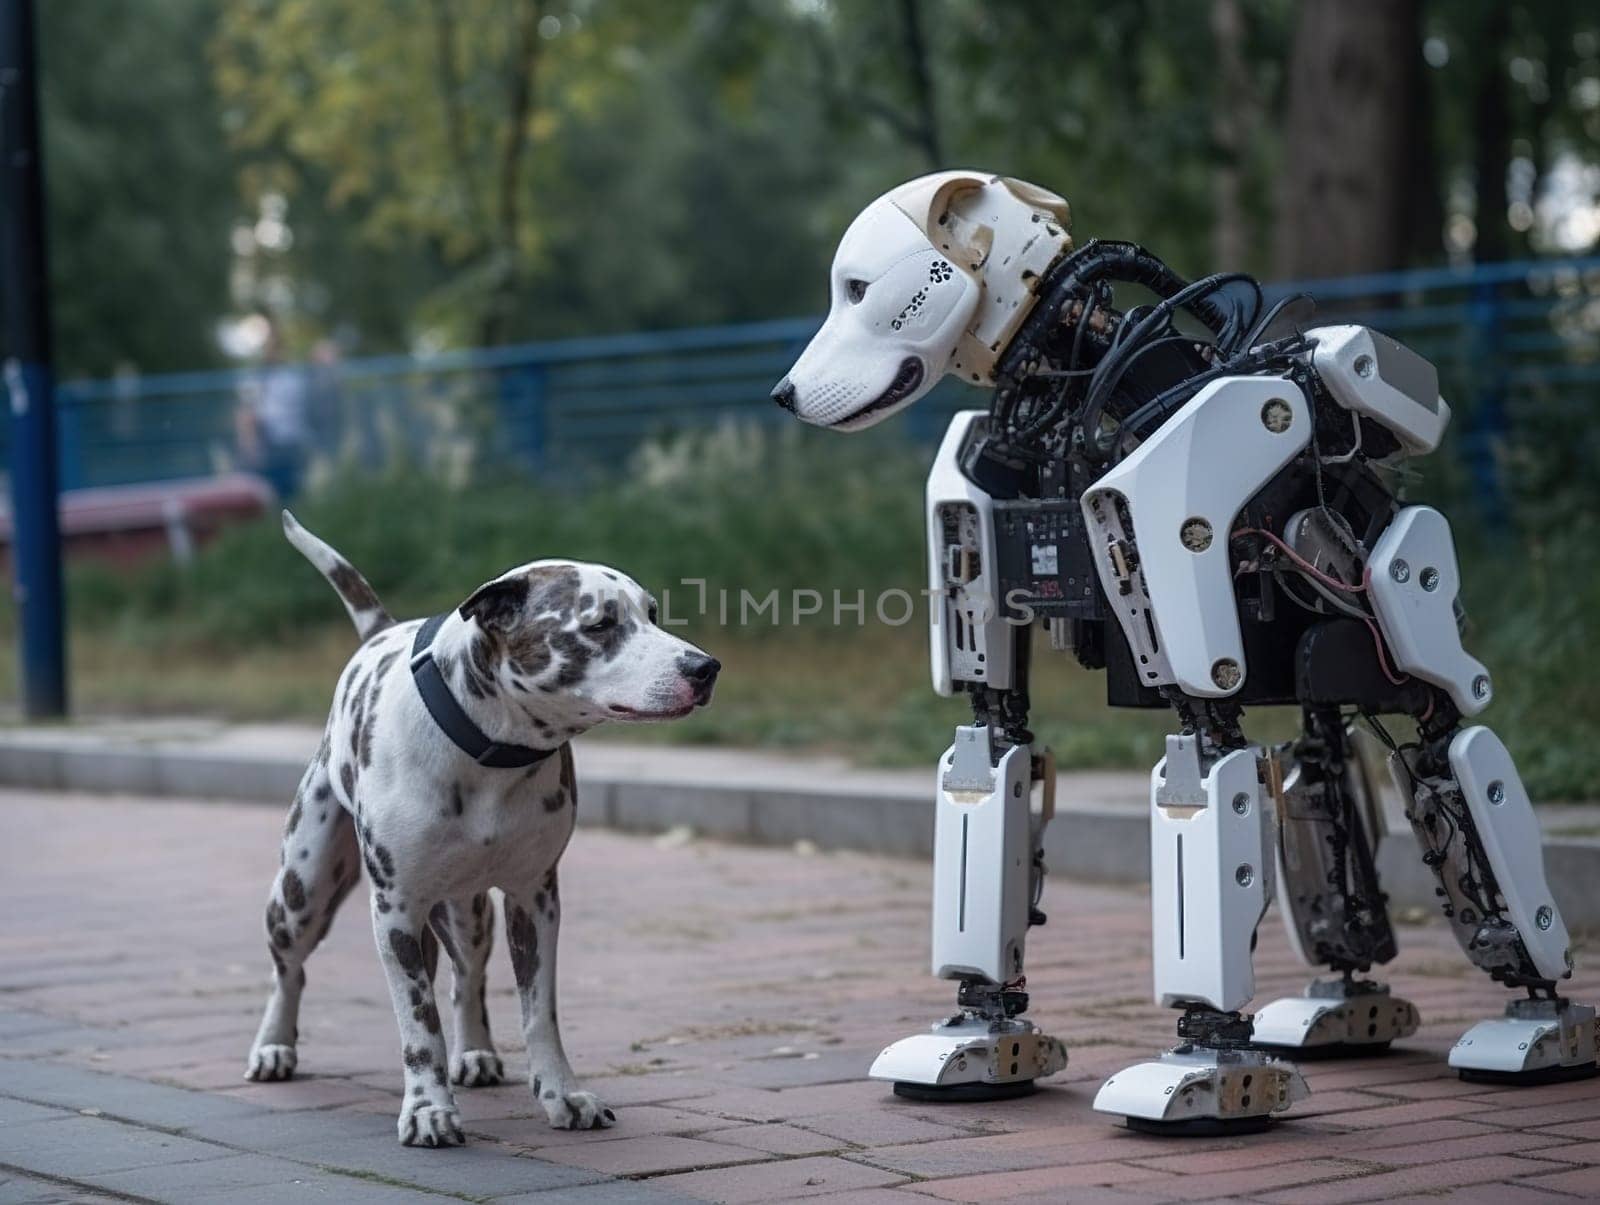 Robot Dog And Real Dog Interact On A Street